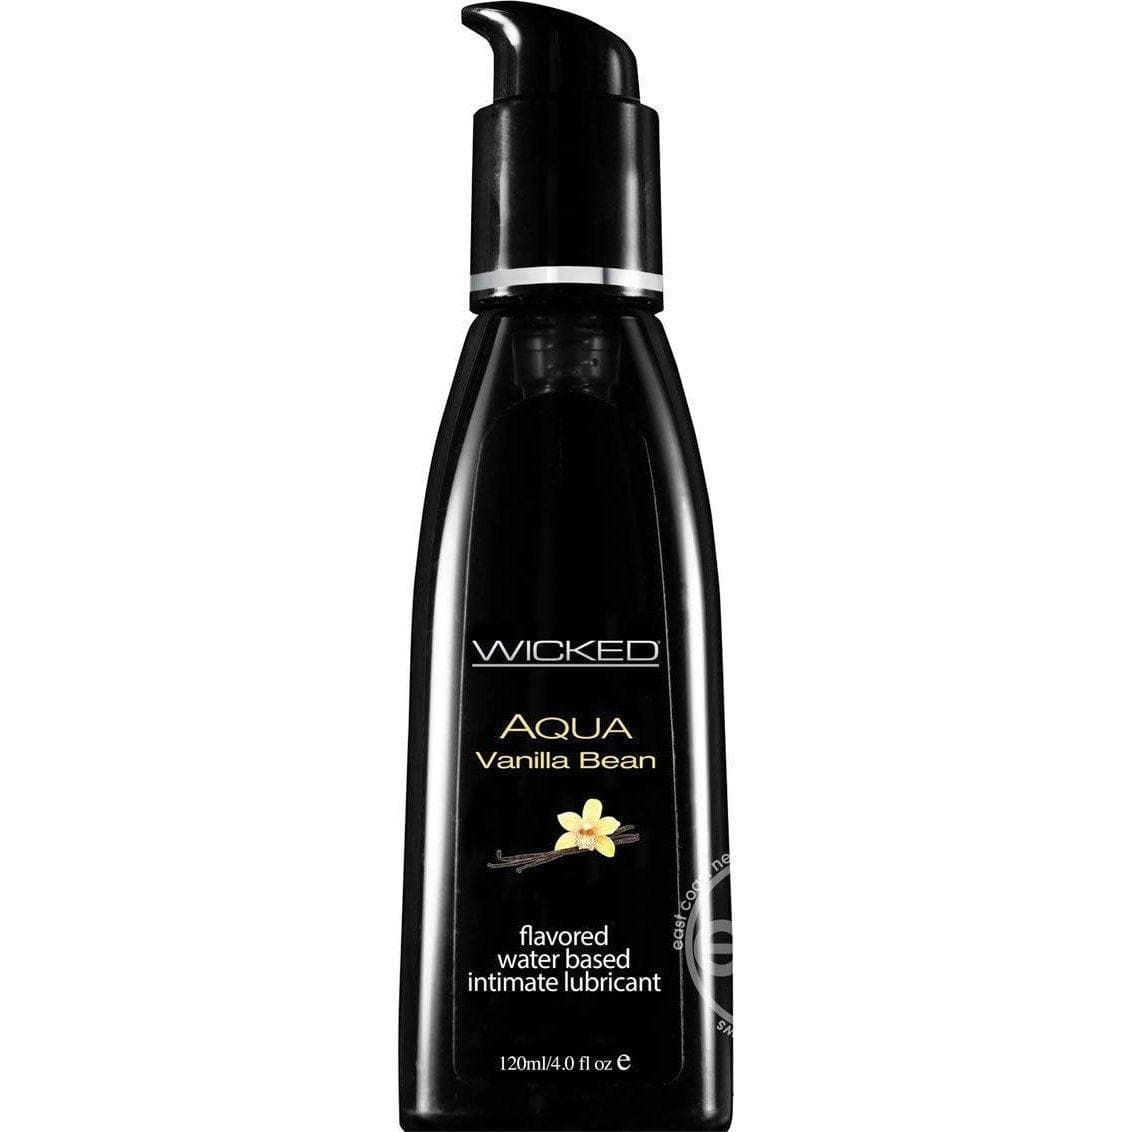 Wicked Aqua Water Based Flavored Intimate Lubricant Vanilla Bean Lube - Romantic Blessings